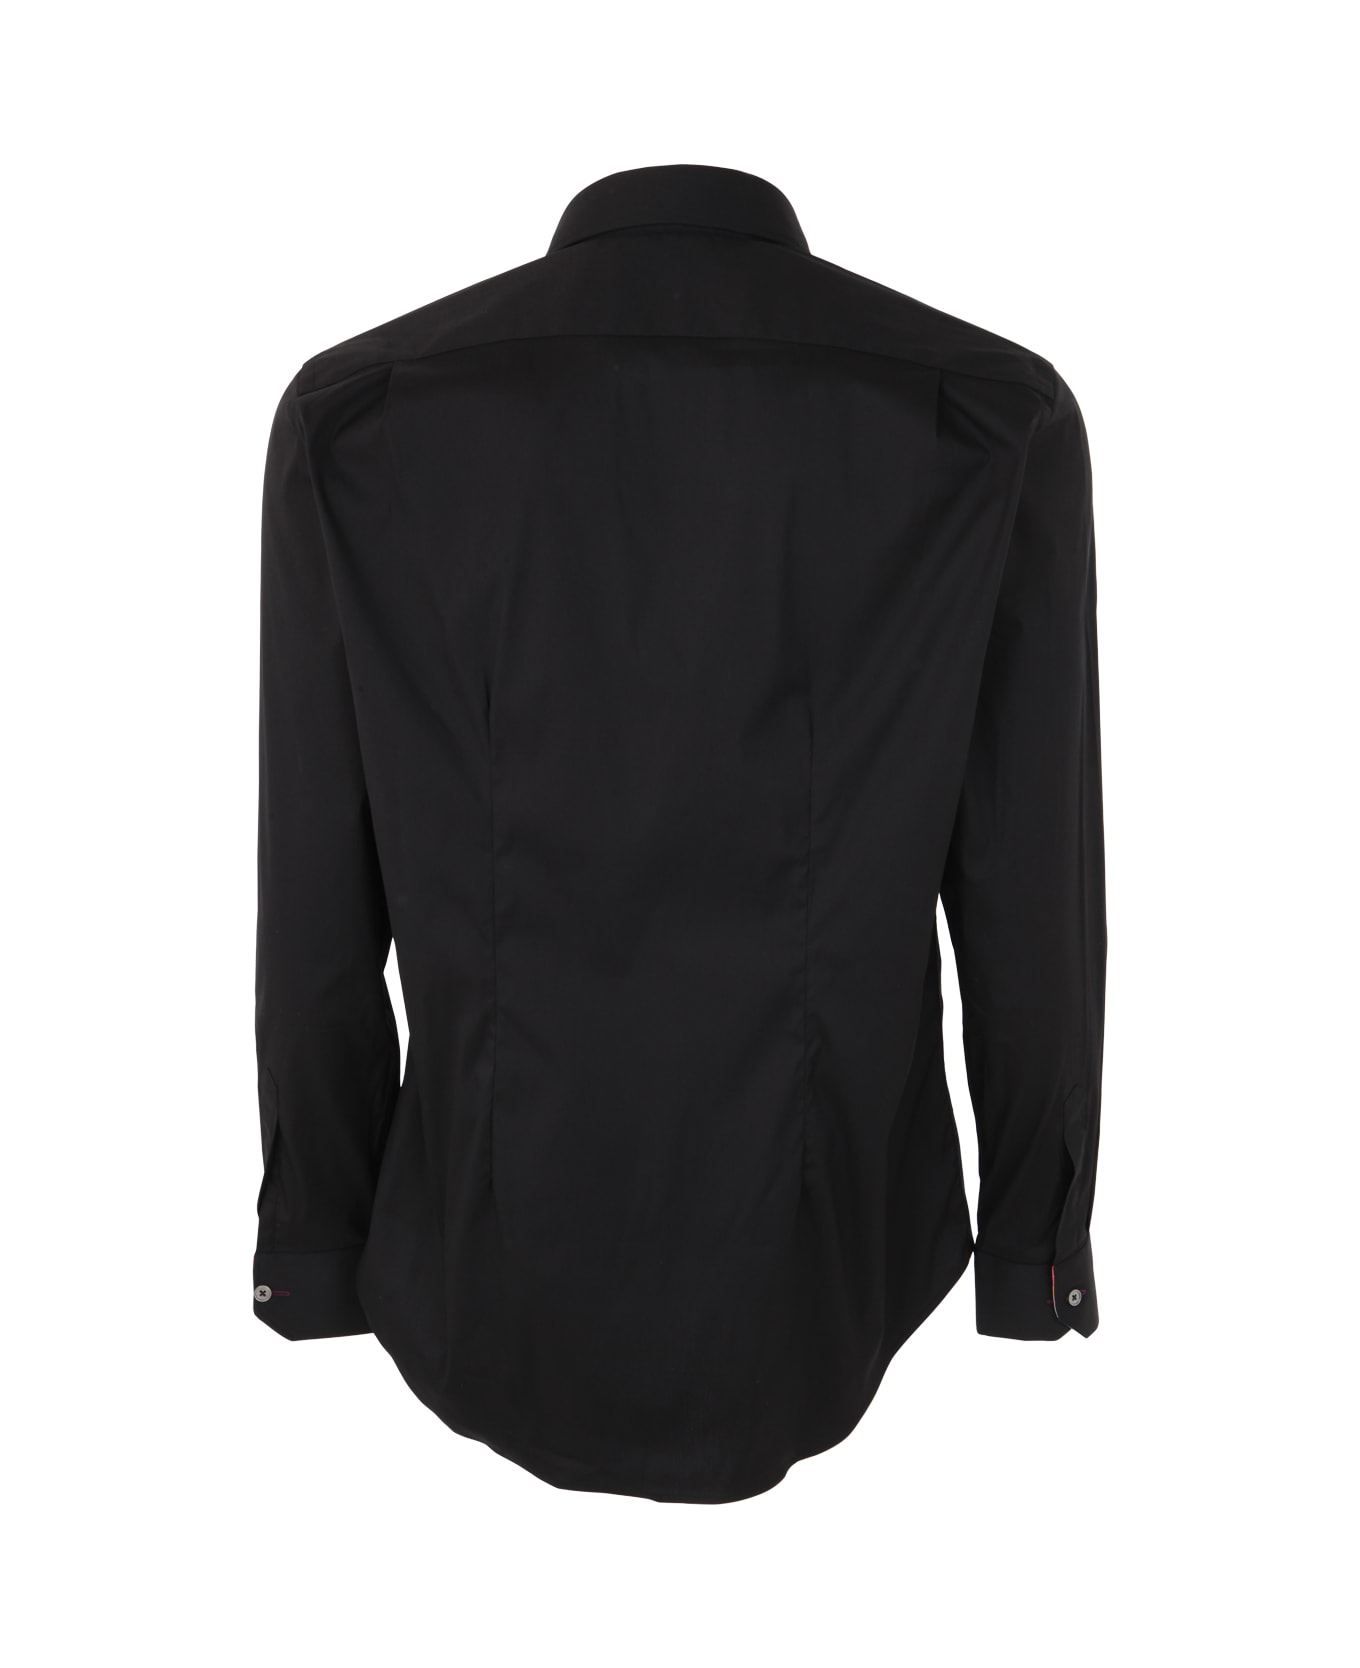 Paul Smith Mens Tailored Fit Shirt - Black